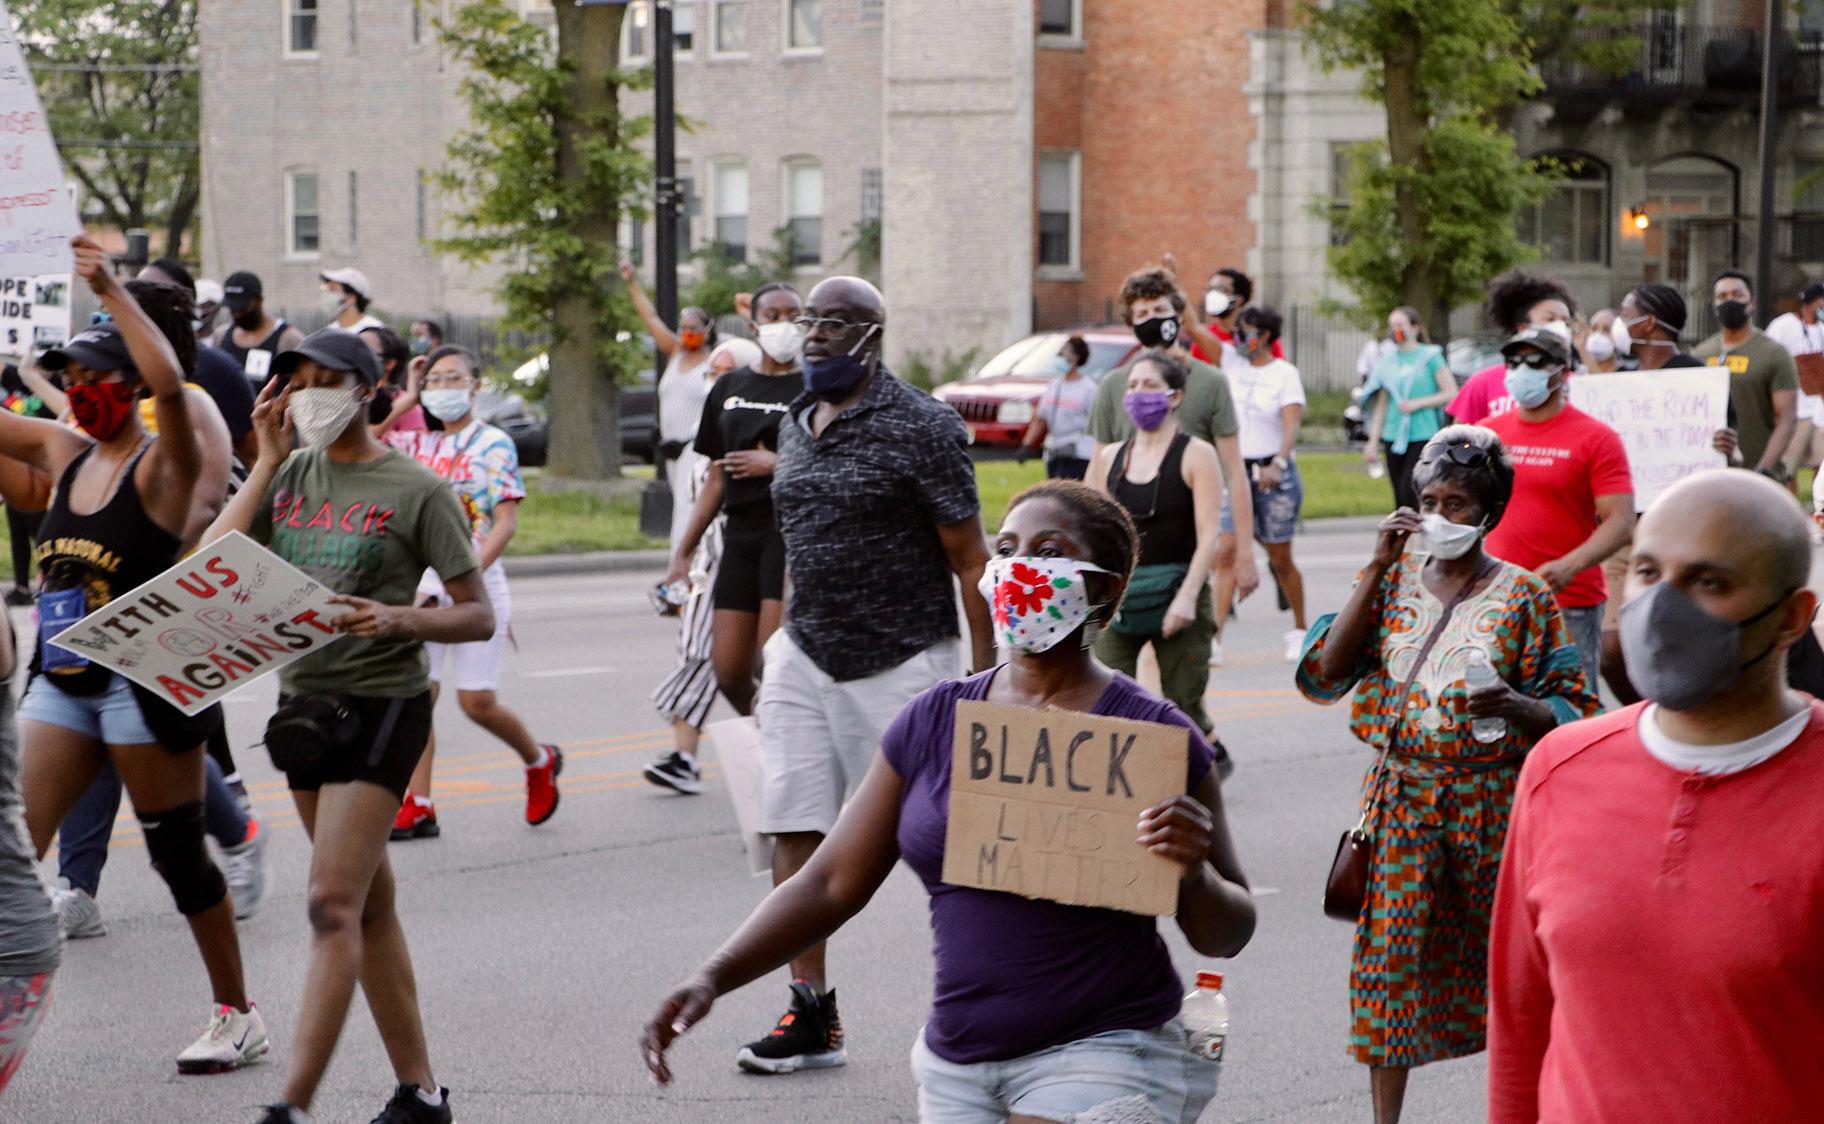 A peaceful protest in Bronzeville on Tuesday, June 2, 2020 was organized by faith leaders in Chicago. (Evan Garcia / WTTW News)